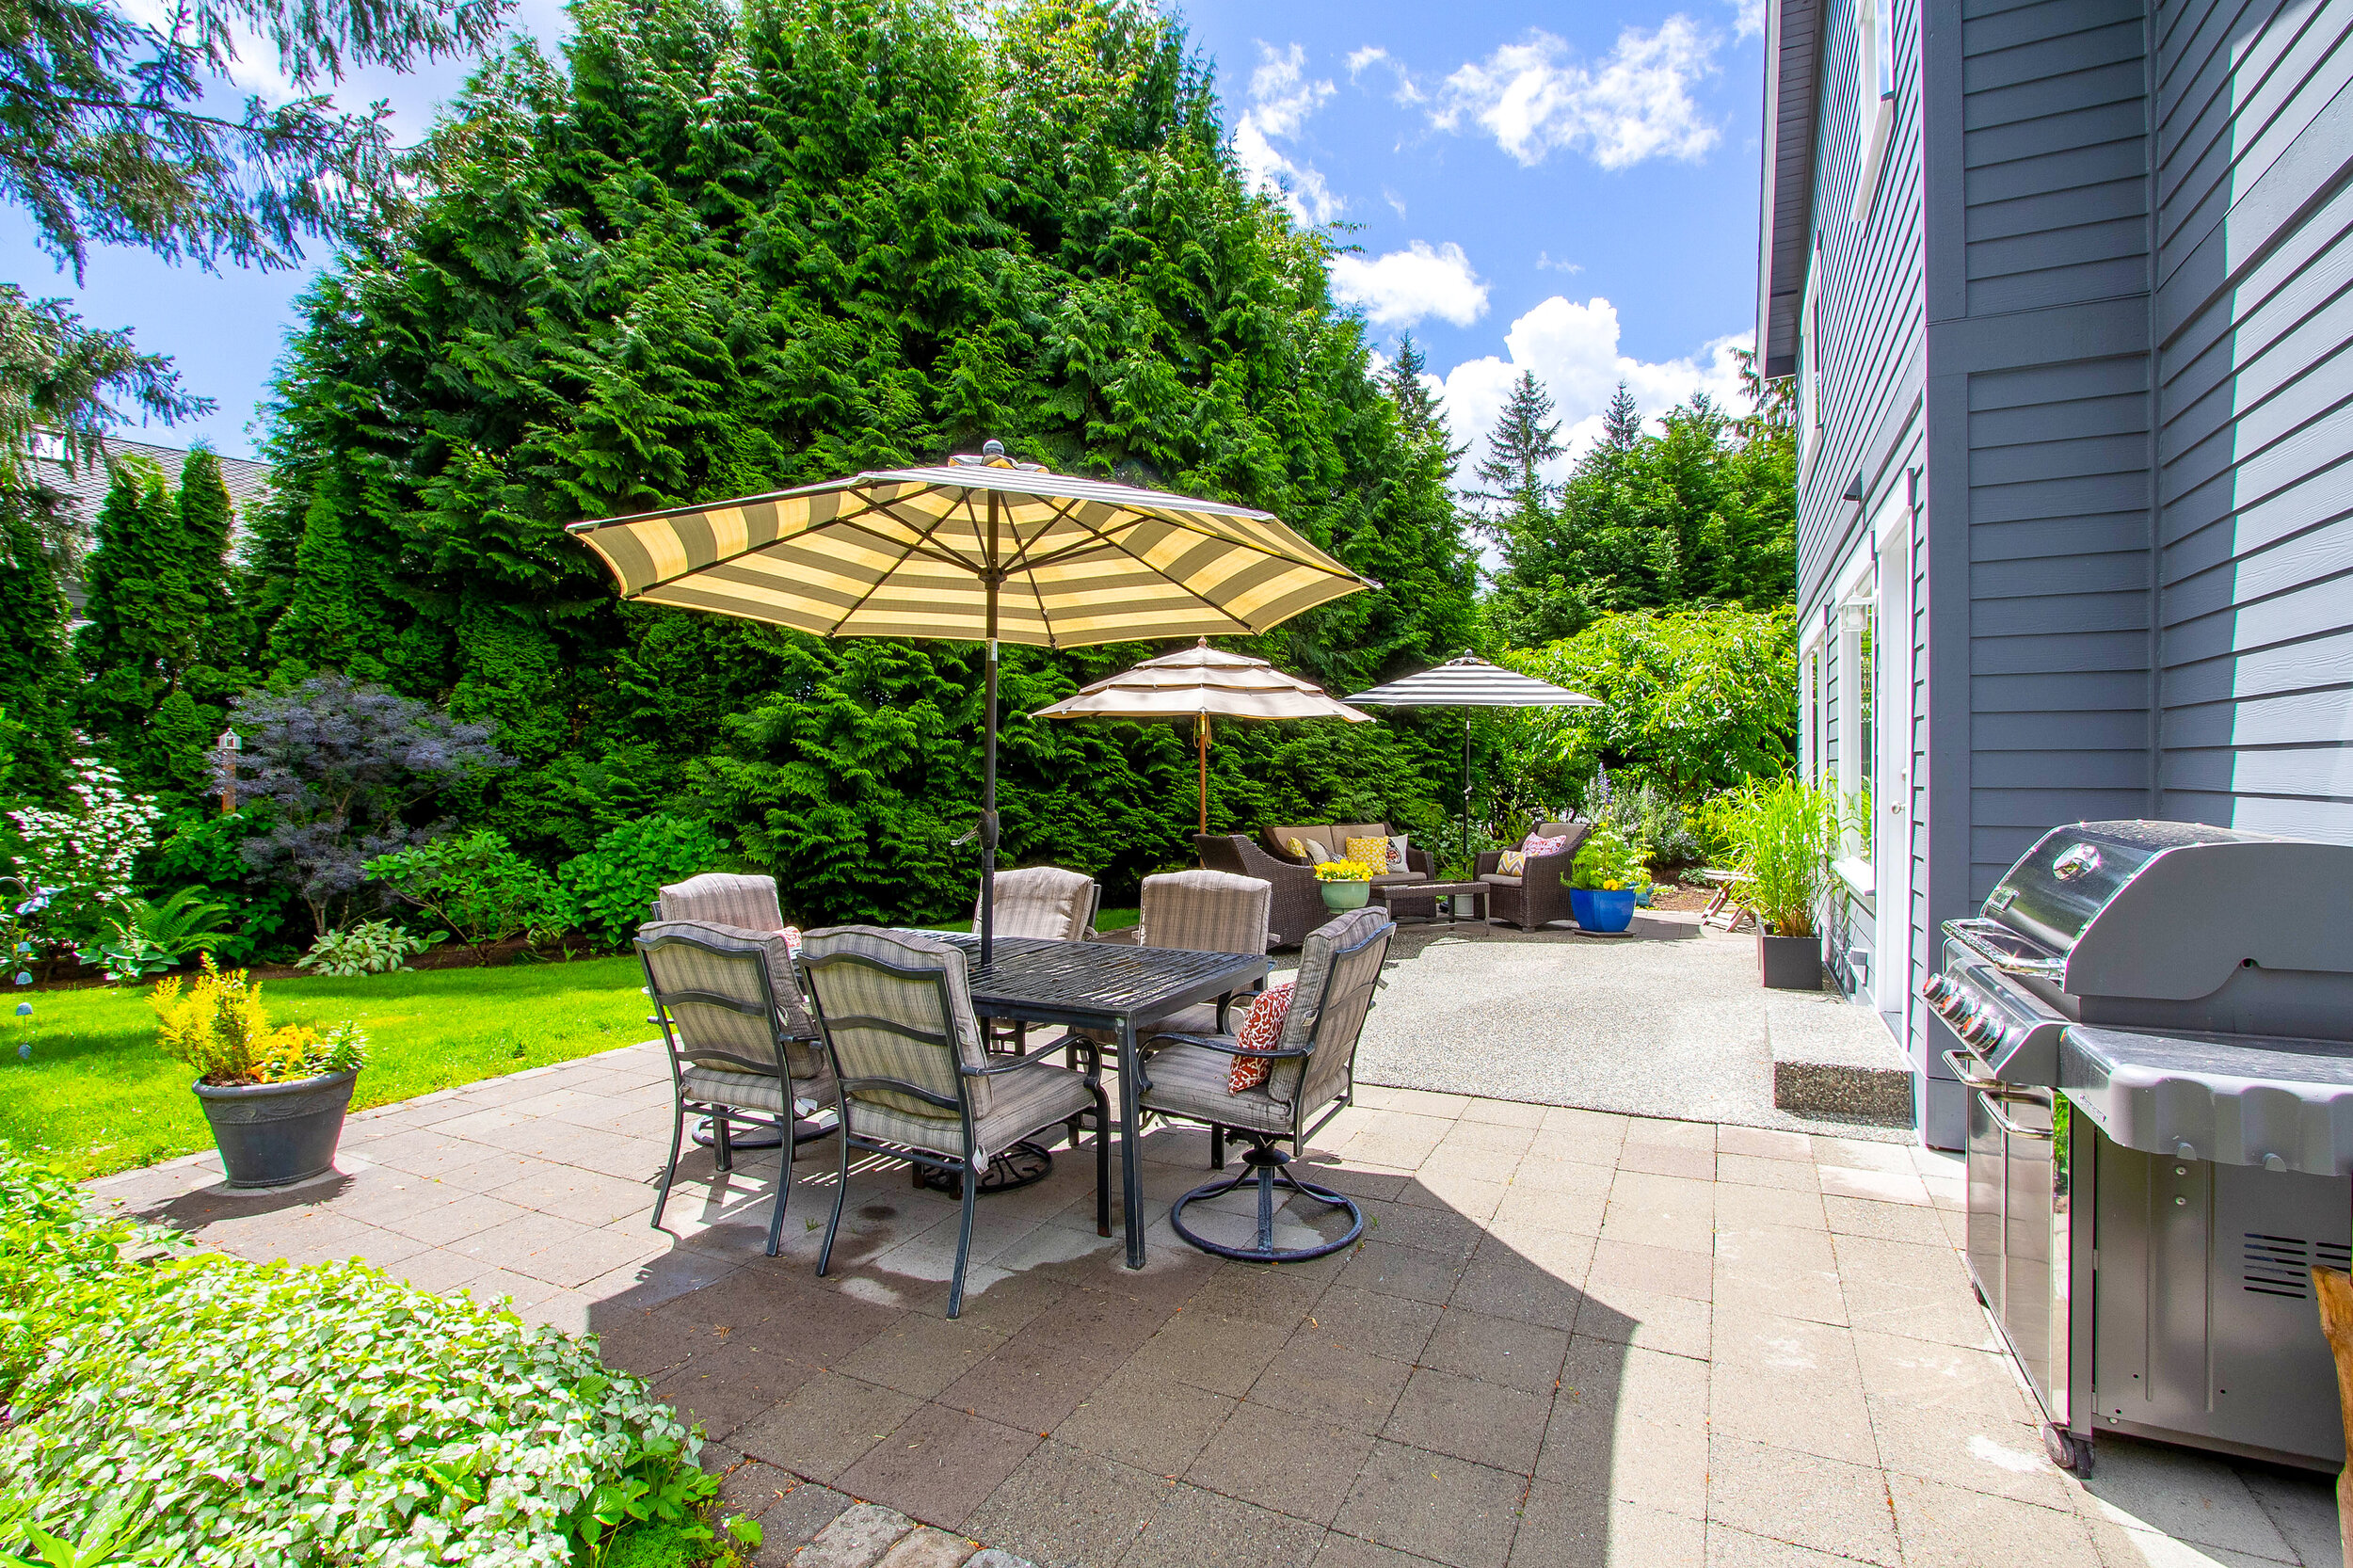  The exquisite backyard boasts everything you could ask for with a sun-filled patio, space for lounging, grilling, and playing in the yard. 